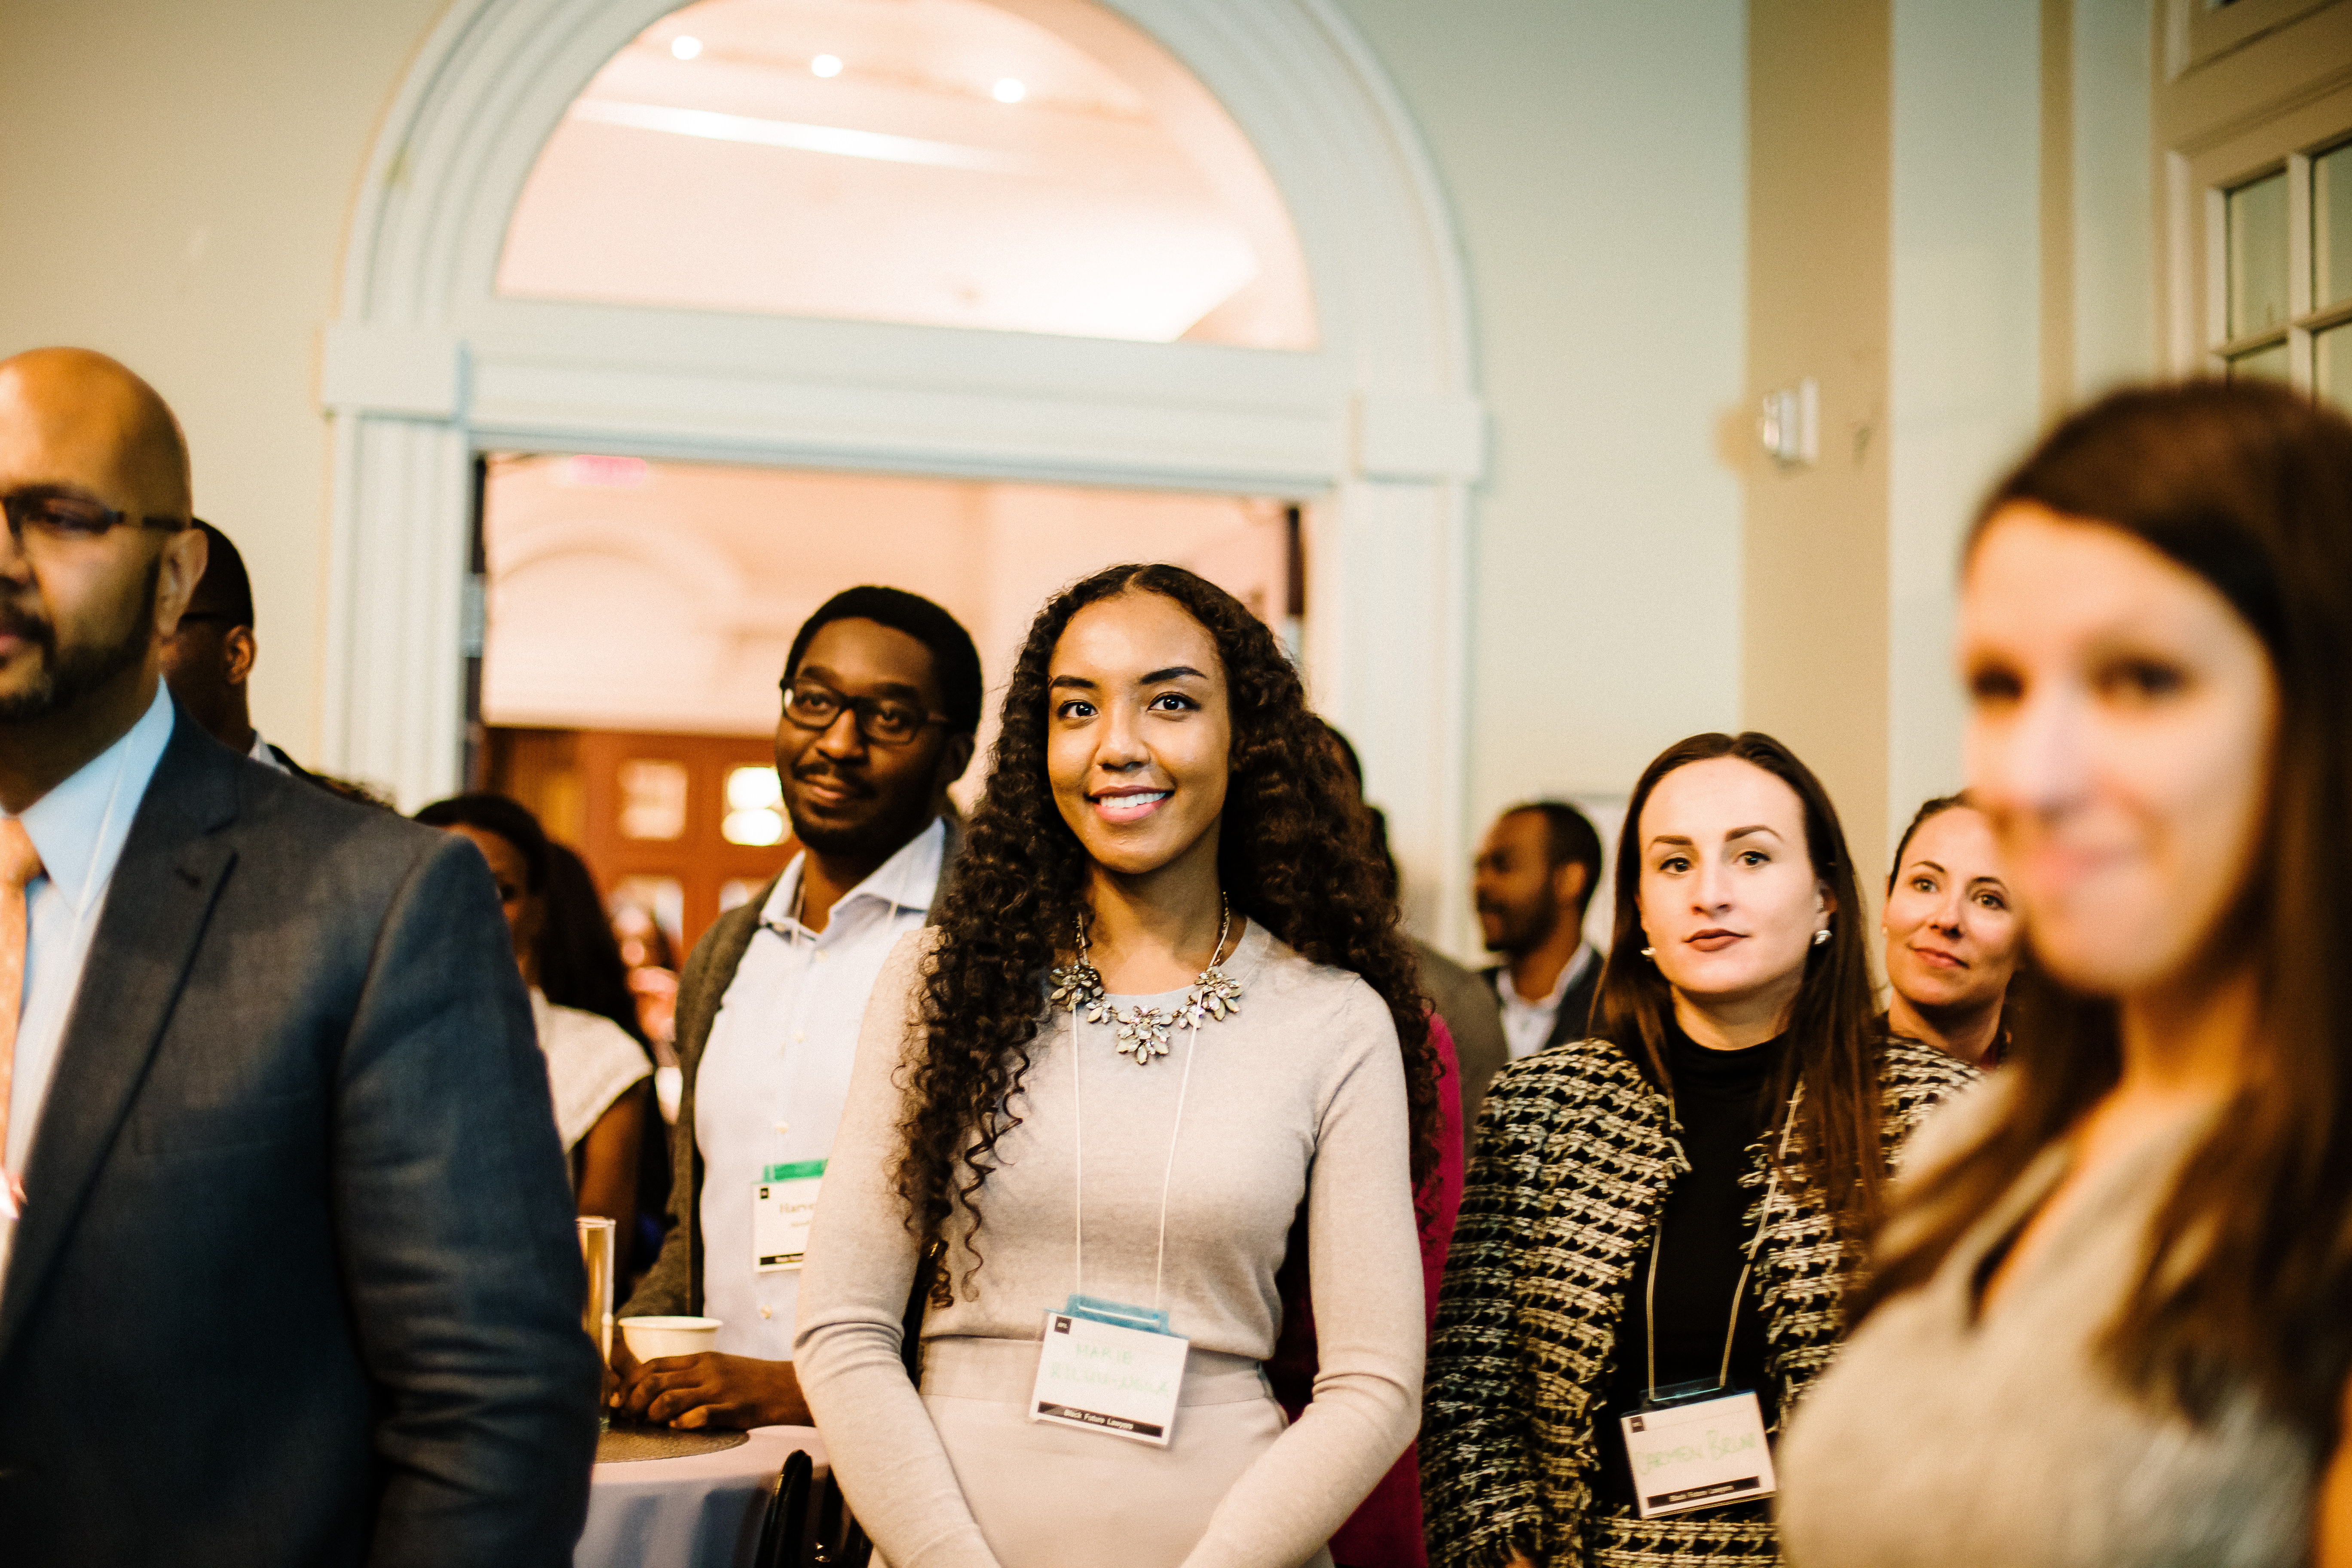 Marie Kiluu-Nigila (centre) at the Black Future Lawyers launch event in January 2020 (photo by Muna Khalil/View in Lens Photography)